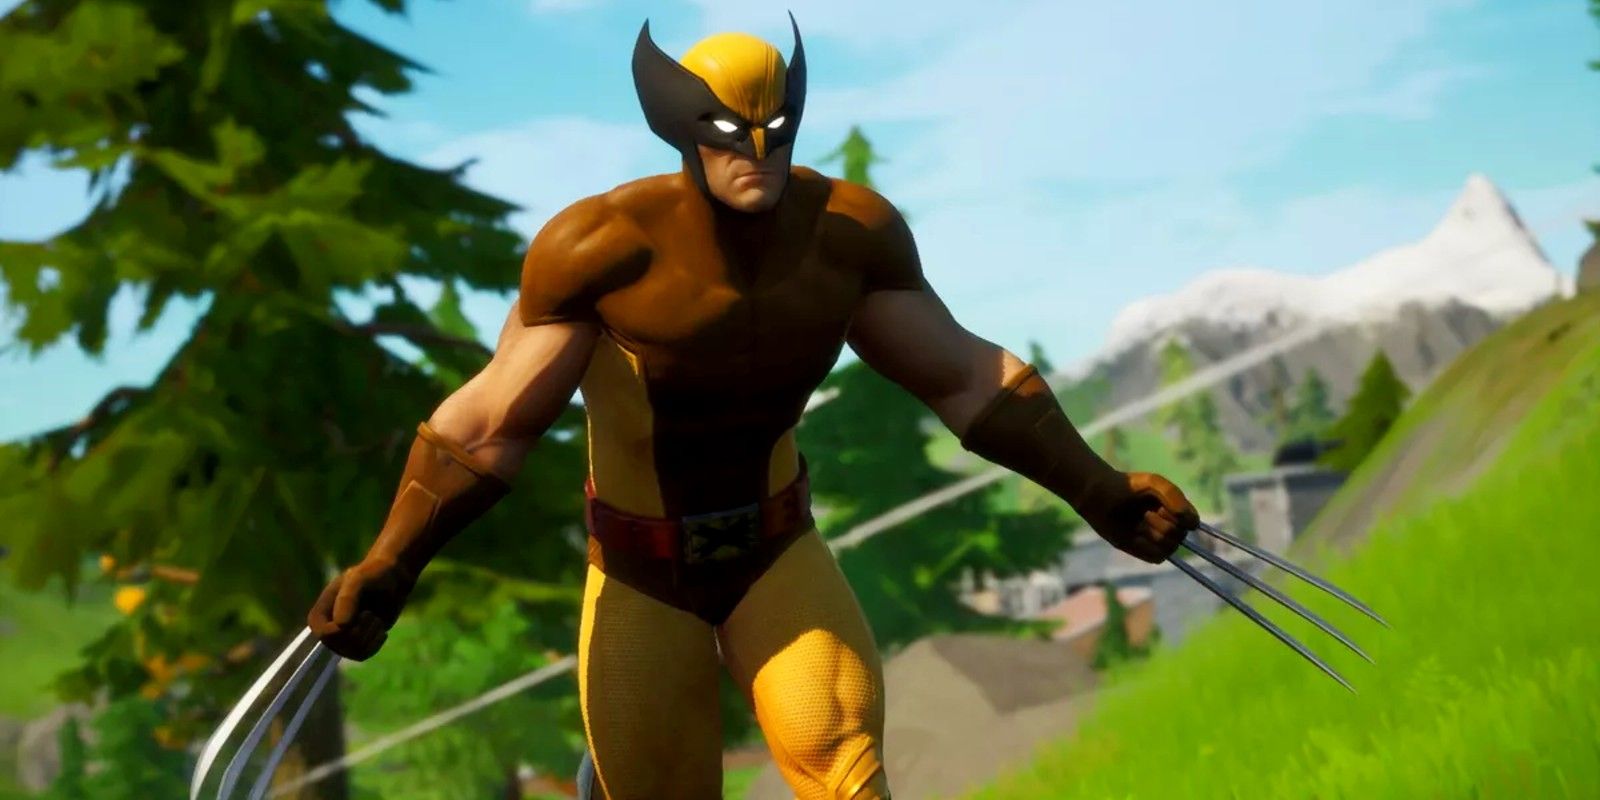 The new Wolverine skin in Fortnite Season 4 will only be available after the player completes at least six challenges